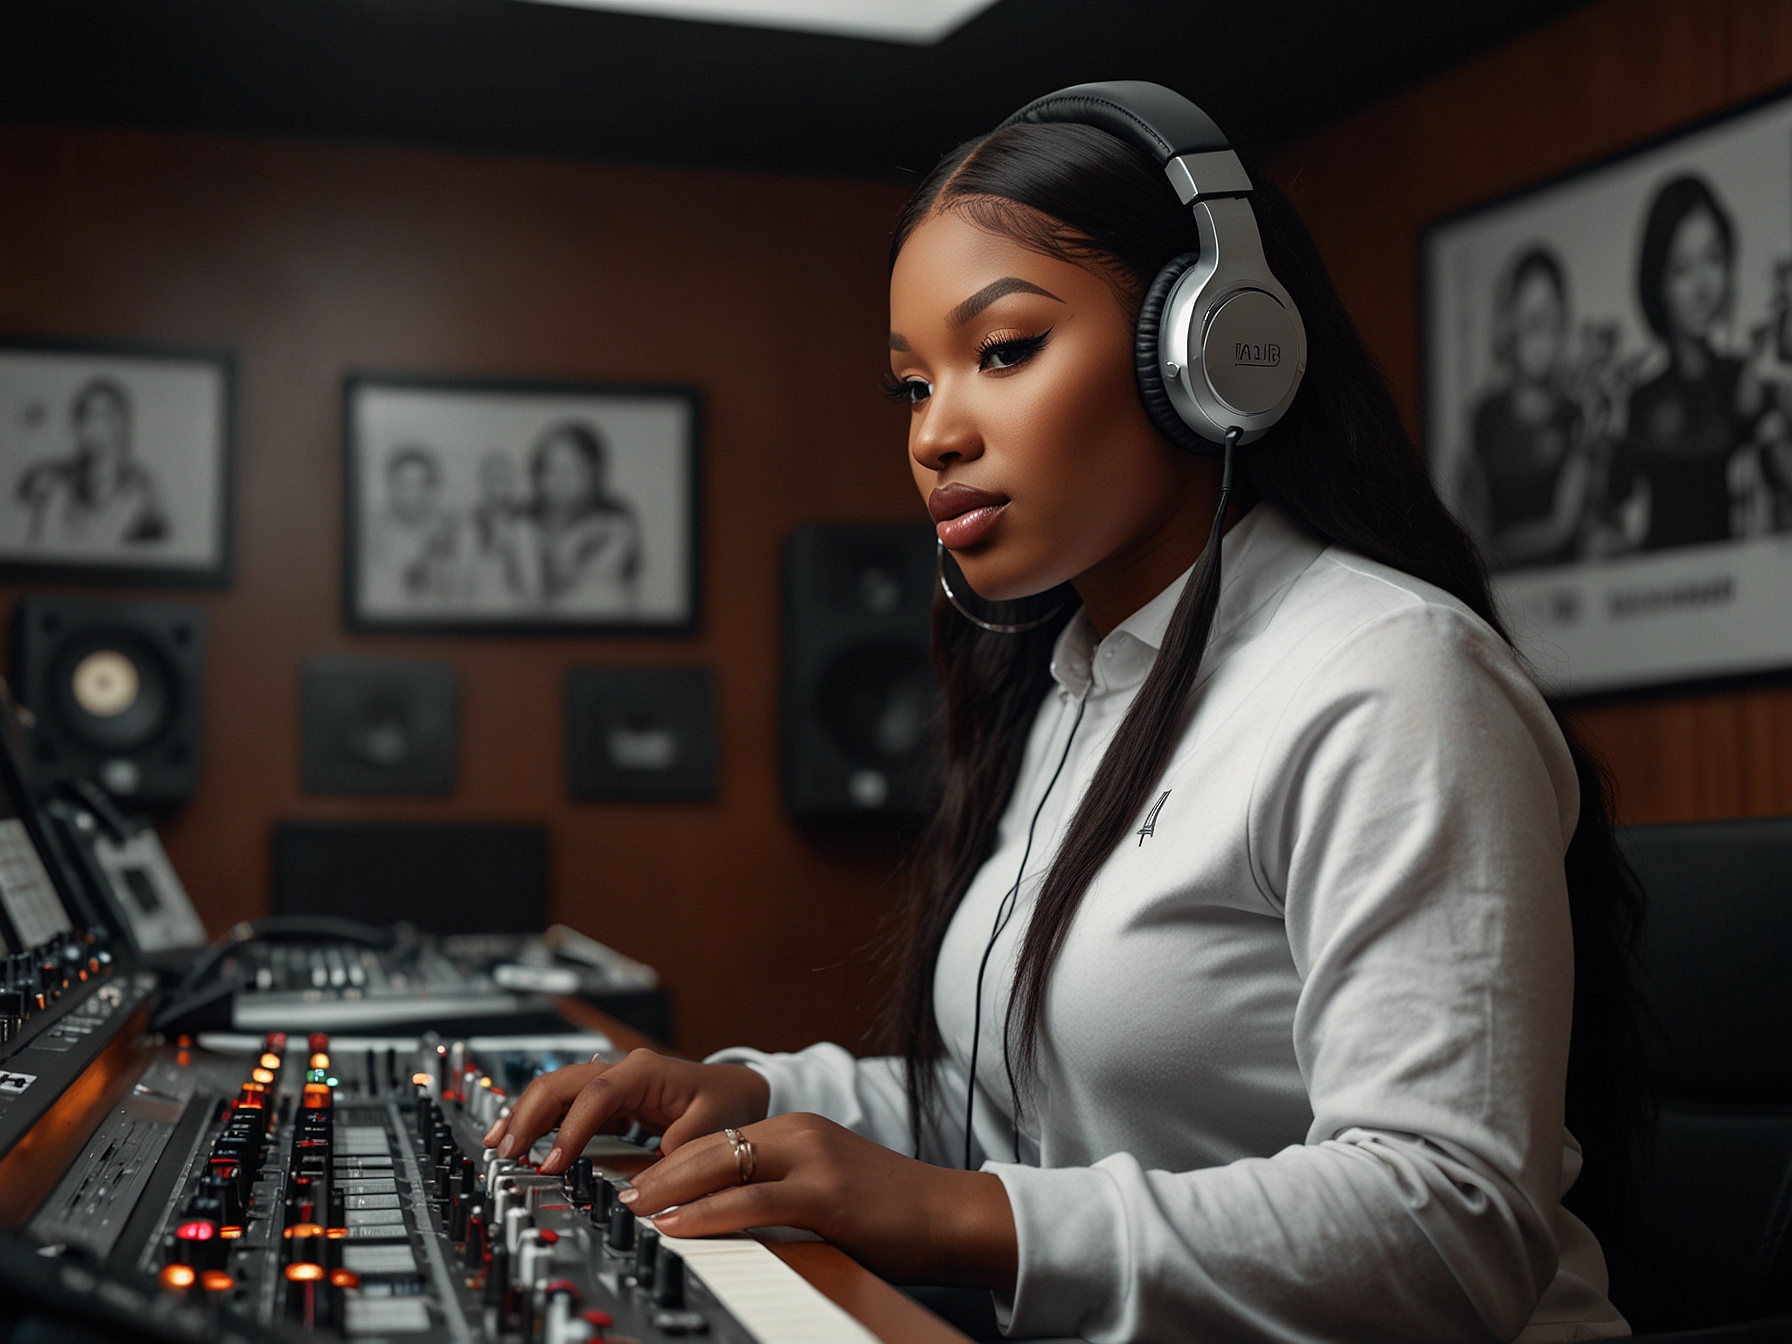 A close-up shot of Megan Thee Stallion in a recording studio, emphasizing the intense focus and confidence she exudes while creating music, reflecting the themes of 'Down Stairs DJ.'